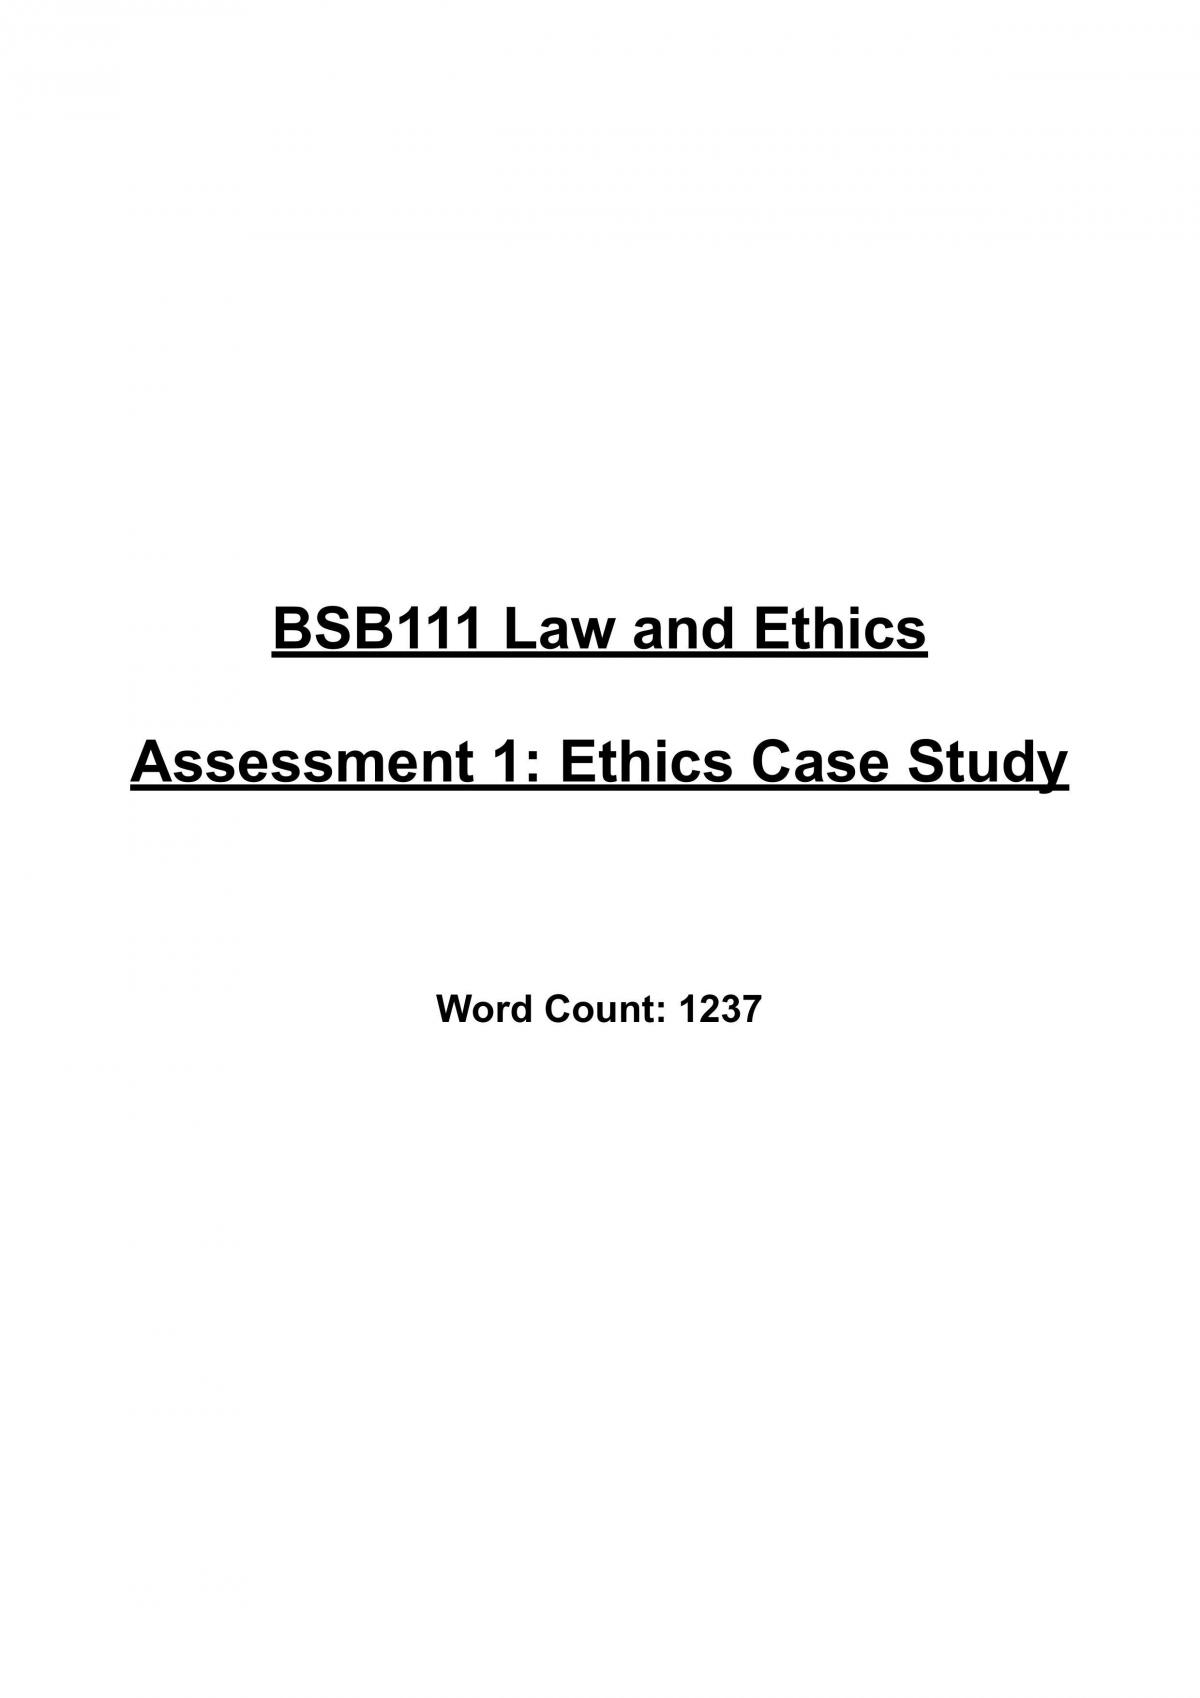 case study related to business ethics